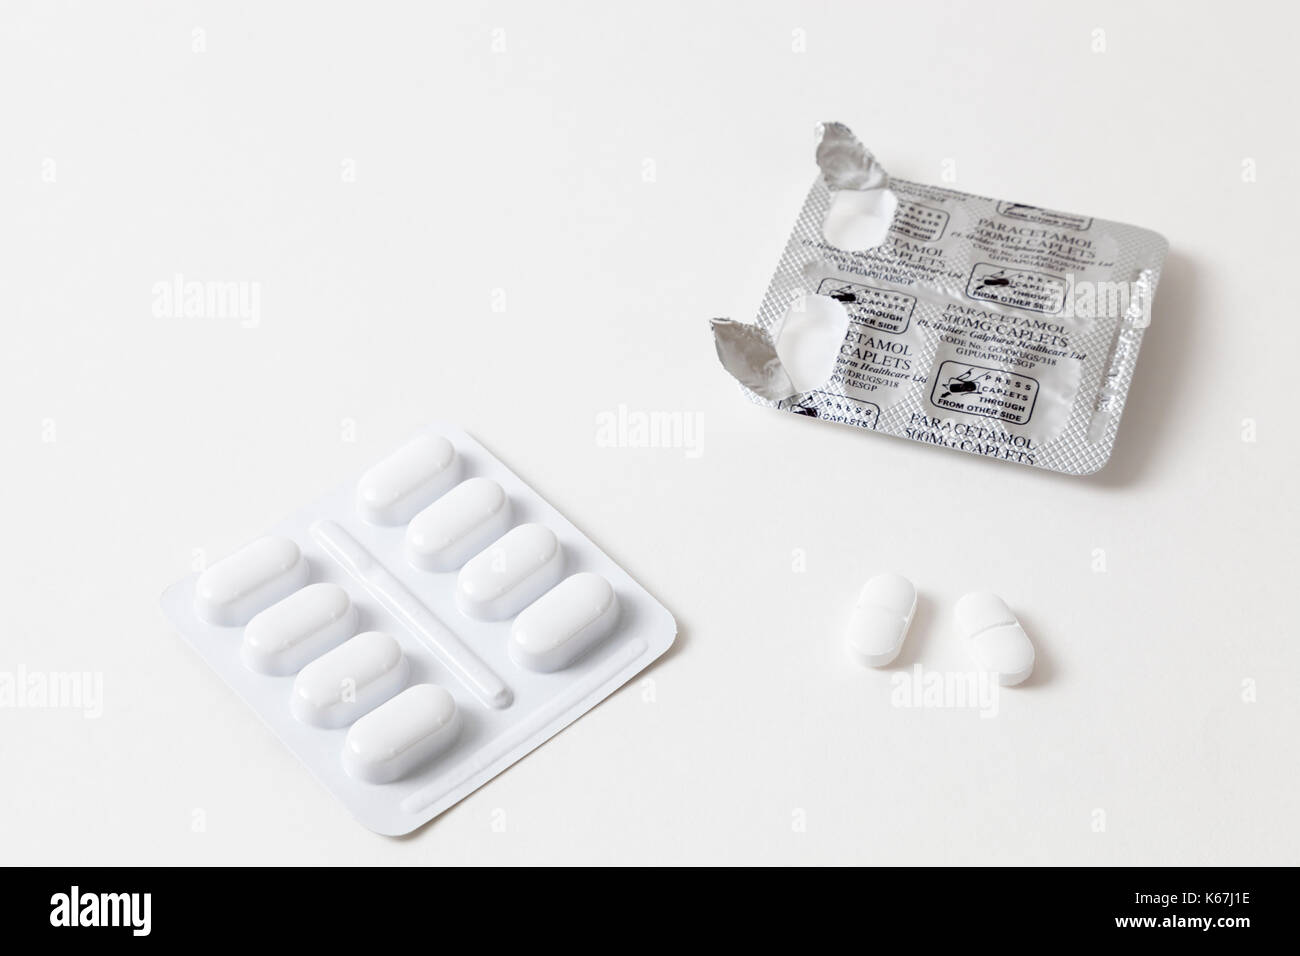 Pain killers: open blister pack of paracetamol pills or tablets with two paracetamol 500 mg caplets removed. Stock Photo